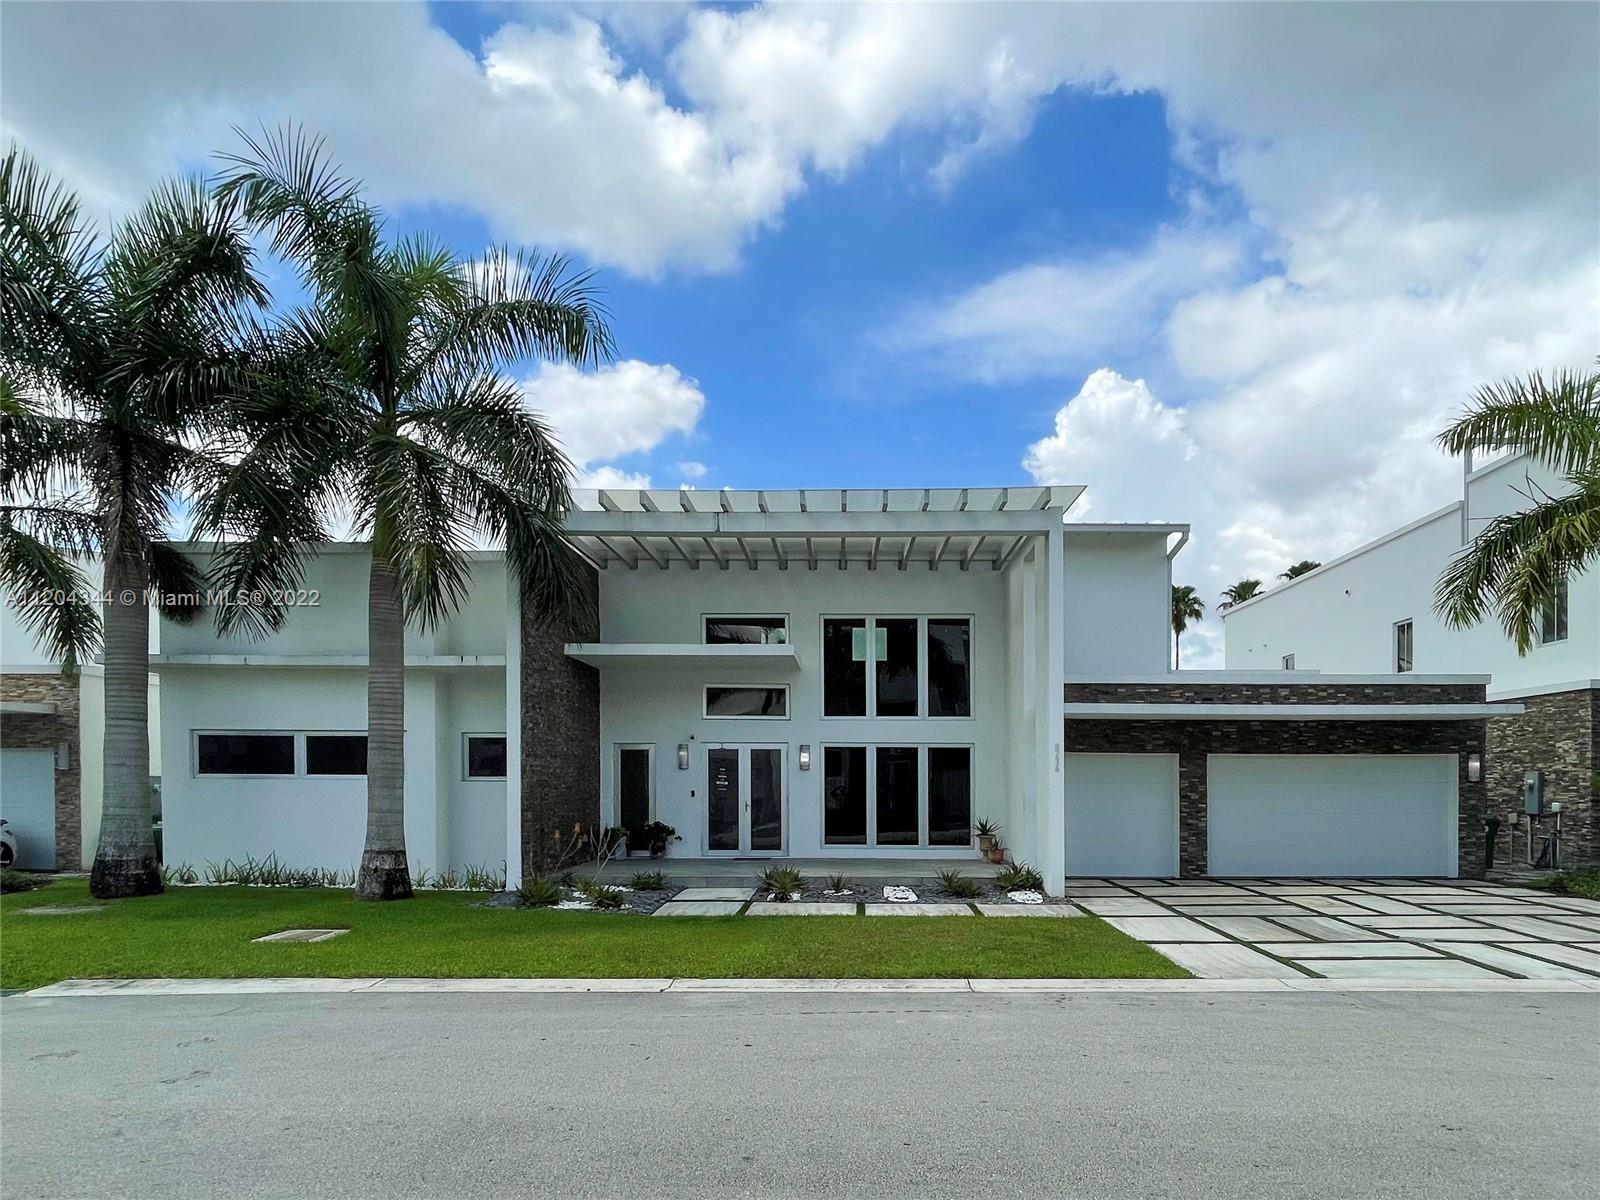 This one-of-a-kind, the single-floor property will leave you speechless. Available now, it is located in the majestic and luxurious private residence of Oasis Park Square at Doral. Offers a unique location with nearby restaurants, theaters, supermarkets, the Miami Internation Airport, A-grade schools, and much more. Be captivated by its modern minimalist architectural style with high ceilings and a large lot. Includes a wine cellar, automatic blinds, oversized master, and walk-in closet. Each bedroom has its own private bath, an oversized patio with a pool, a barbecue grill, a side burner, an ice maker, a refrigerator, etc. Easy access through the Palmetto Expwy, Turnpike, and Dolphin Express Way. Submit all offers for MLS OFFERS. PRICE IS NOT CONTINGENT ON APPRAISAL